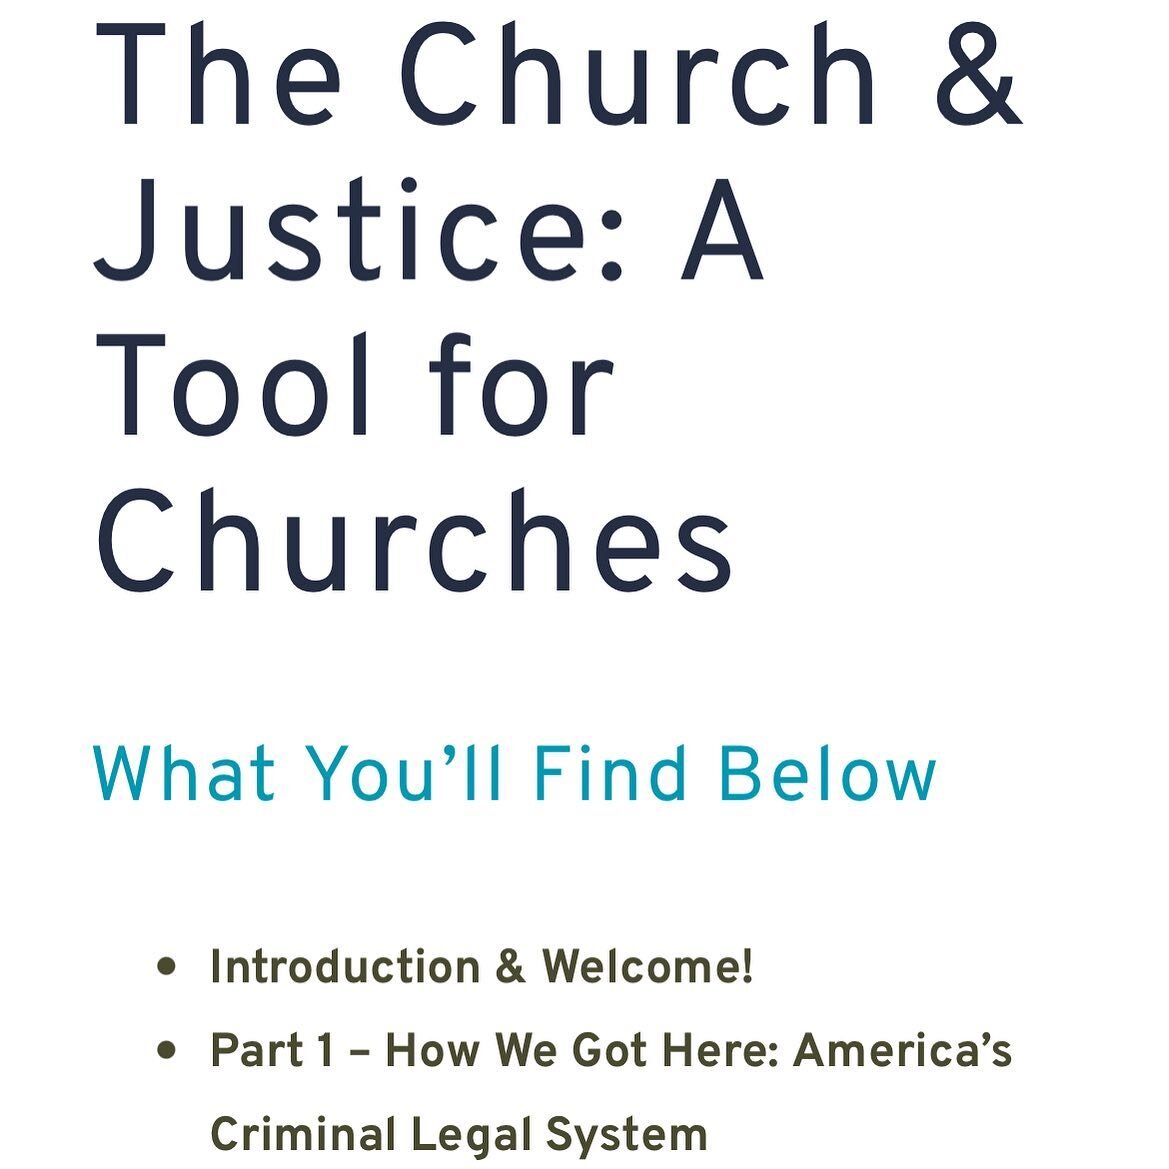 Churches, here&rsquo;s a study tool created by @equaljusticeusa Evangelical Network that could be helpful for leading people into better understanding the current state of equity in America. Go to evangelical.ejusa.org and click on resources.